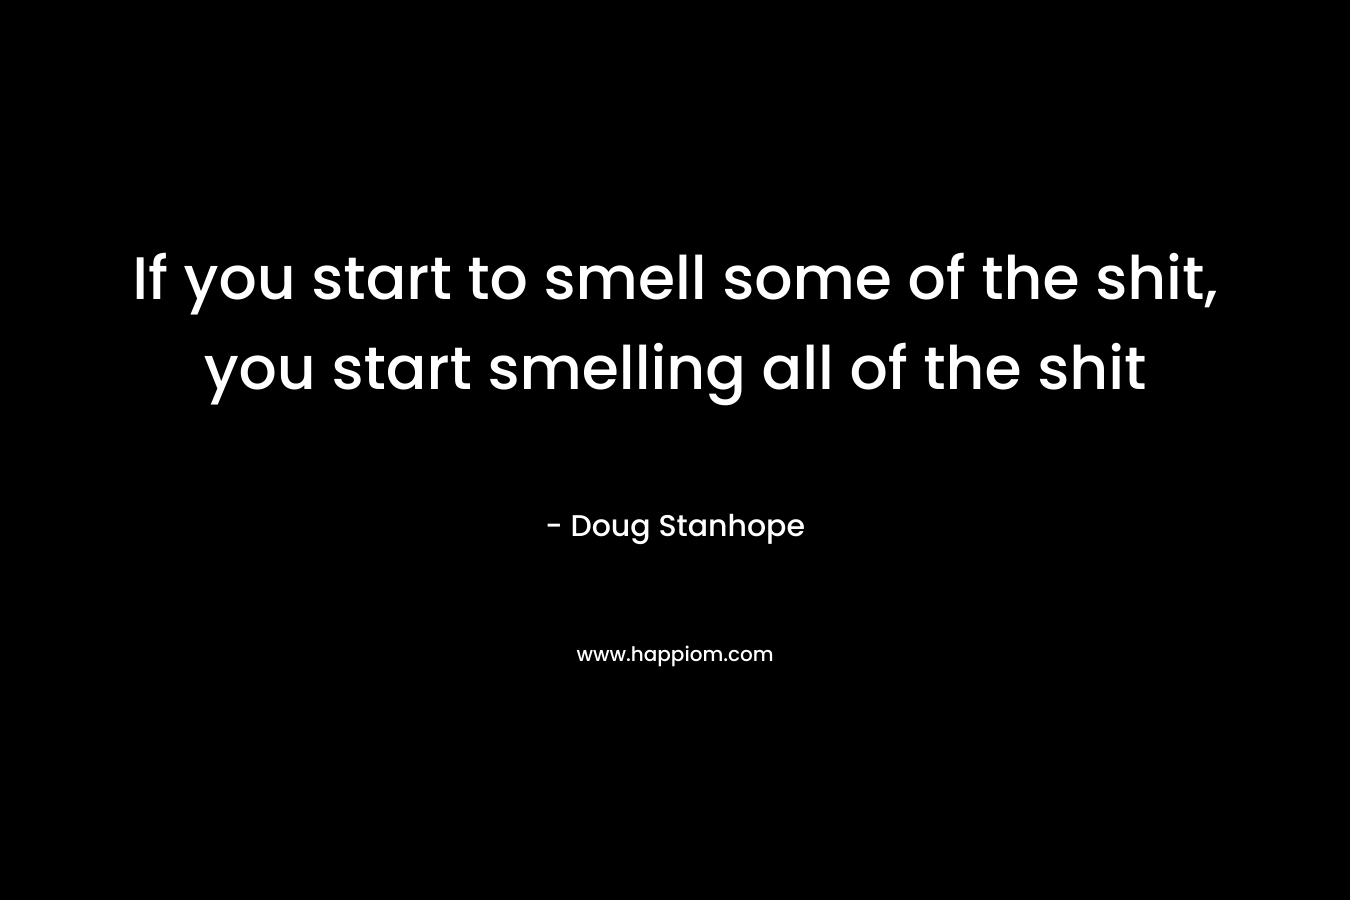 If you start to smell some of the shit, you start smelling all of the shit